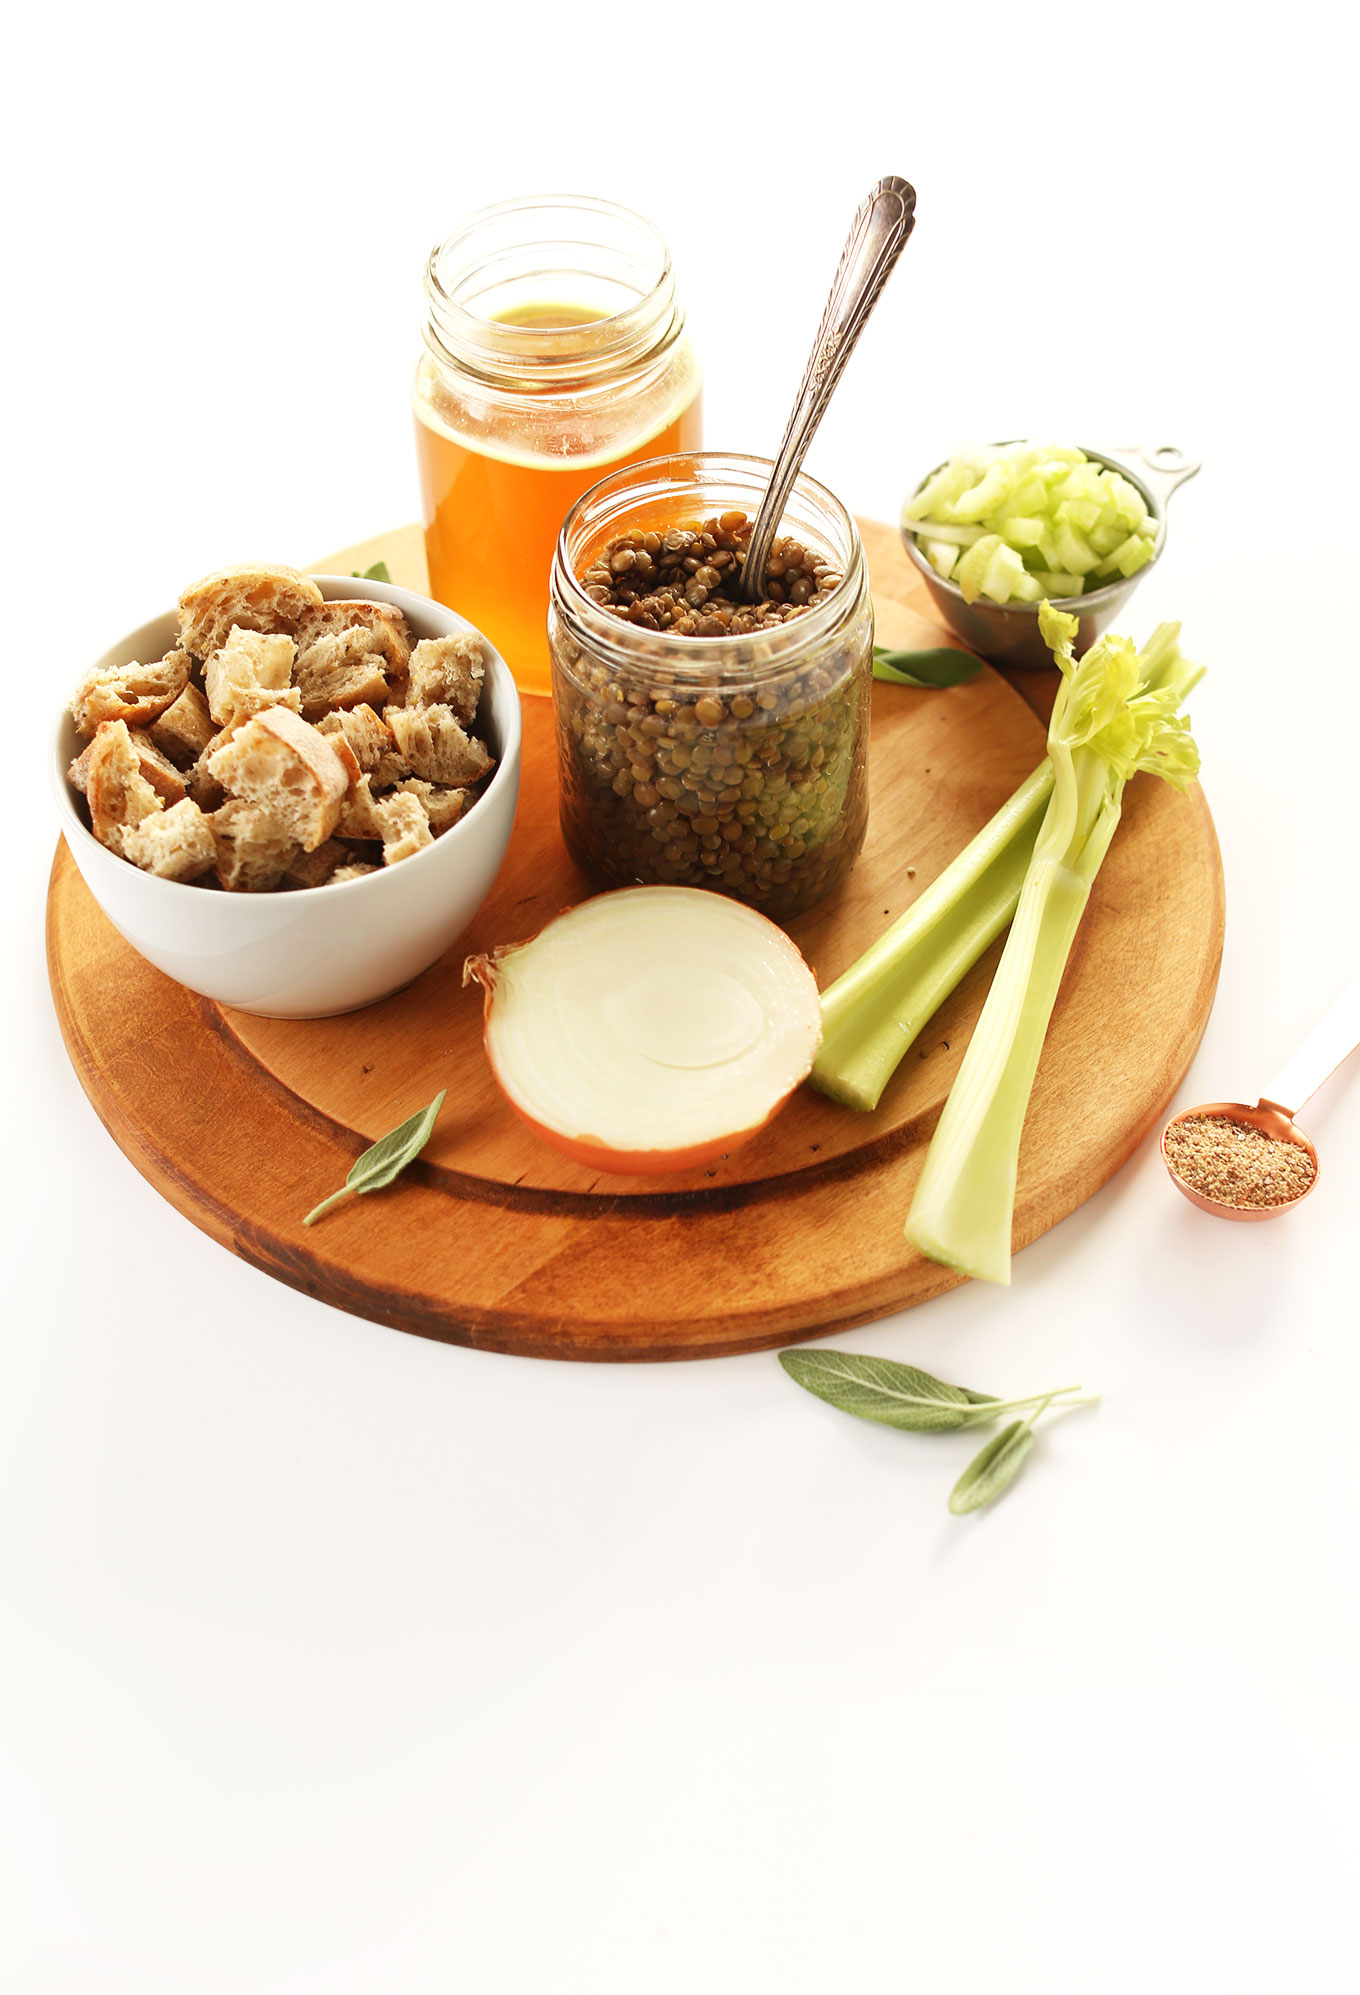 Cutting board with celery, onion, lentils, bread, and broth for making homemade vegan stuffing